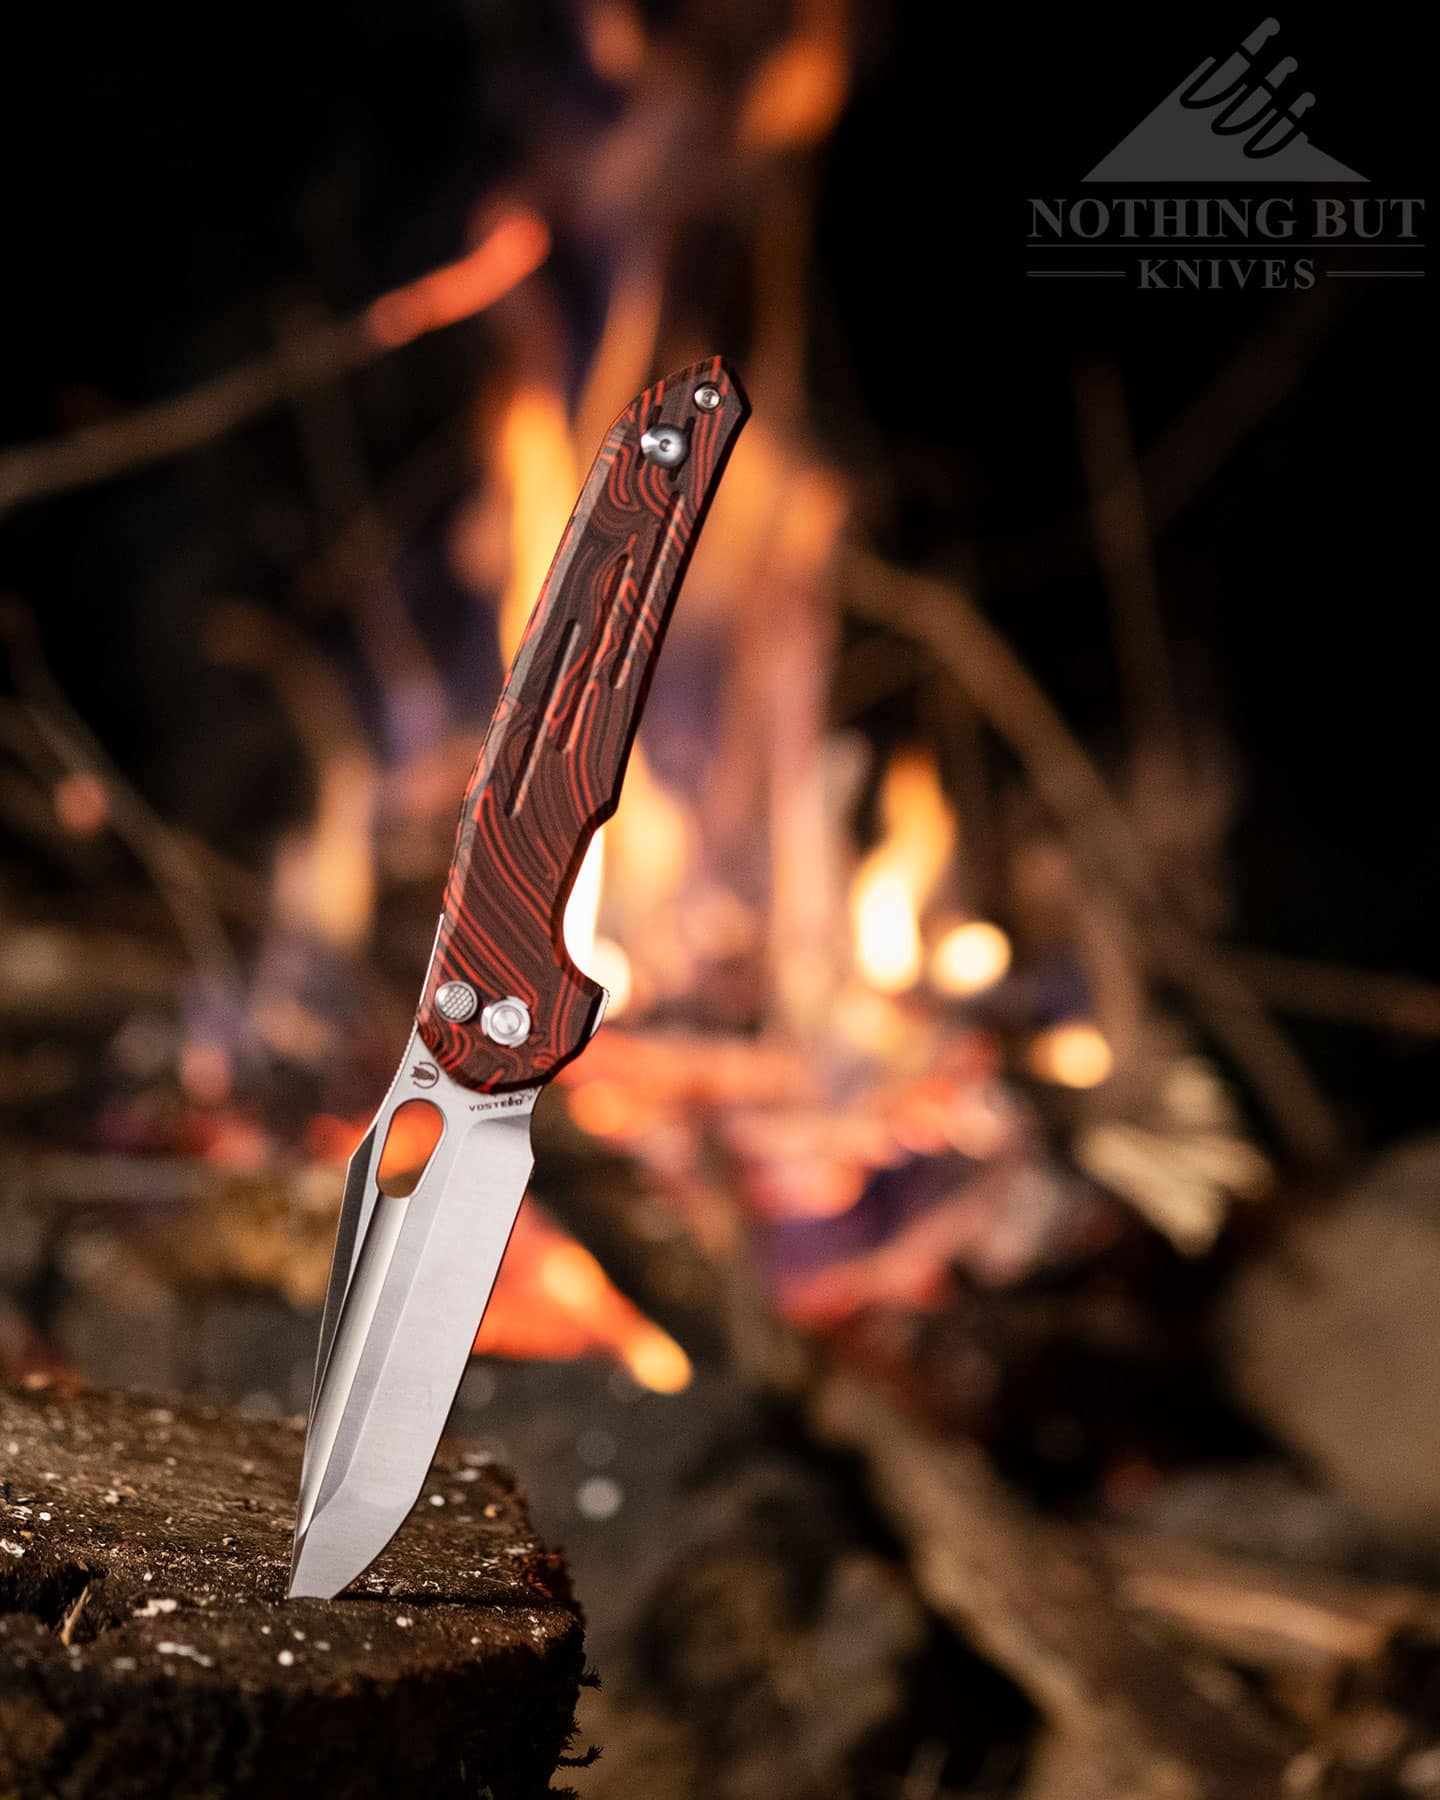 The Vosteed Culery Thunderbird won a 2022 Drunken Hillbilly Award for The Clickiest Knife of The Year.